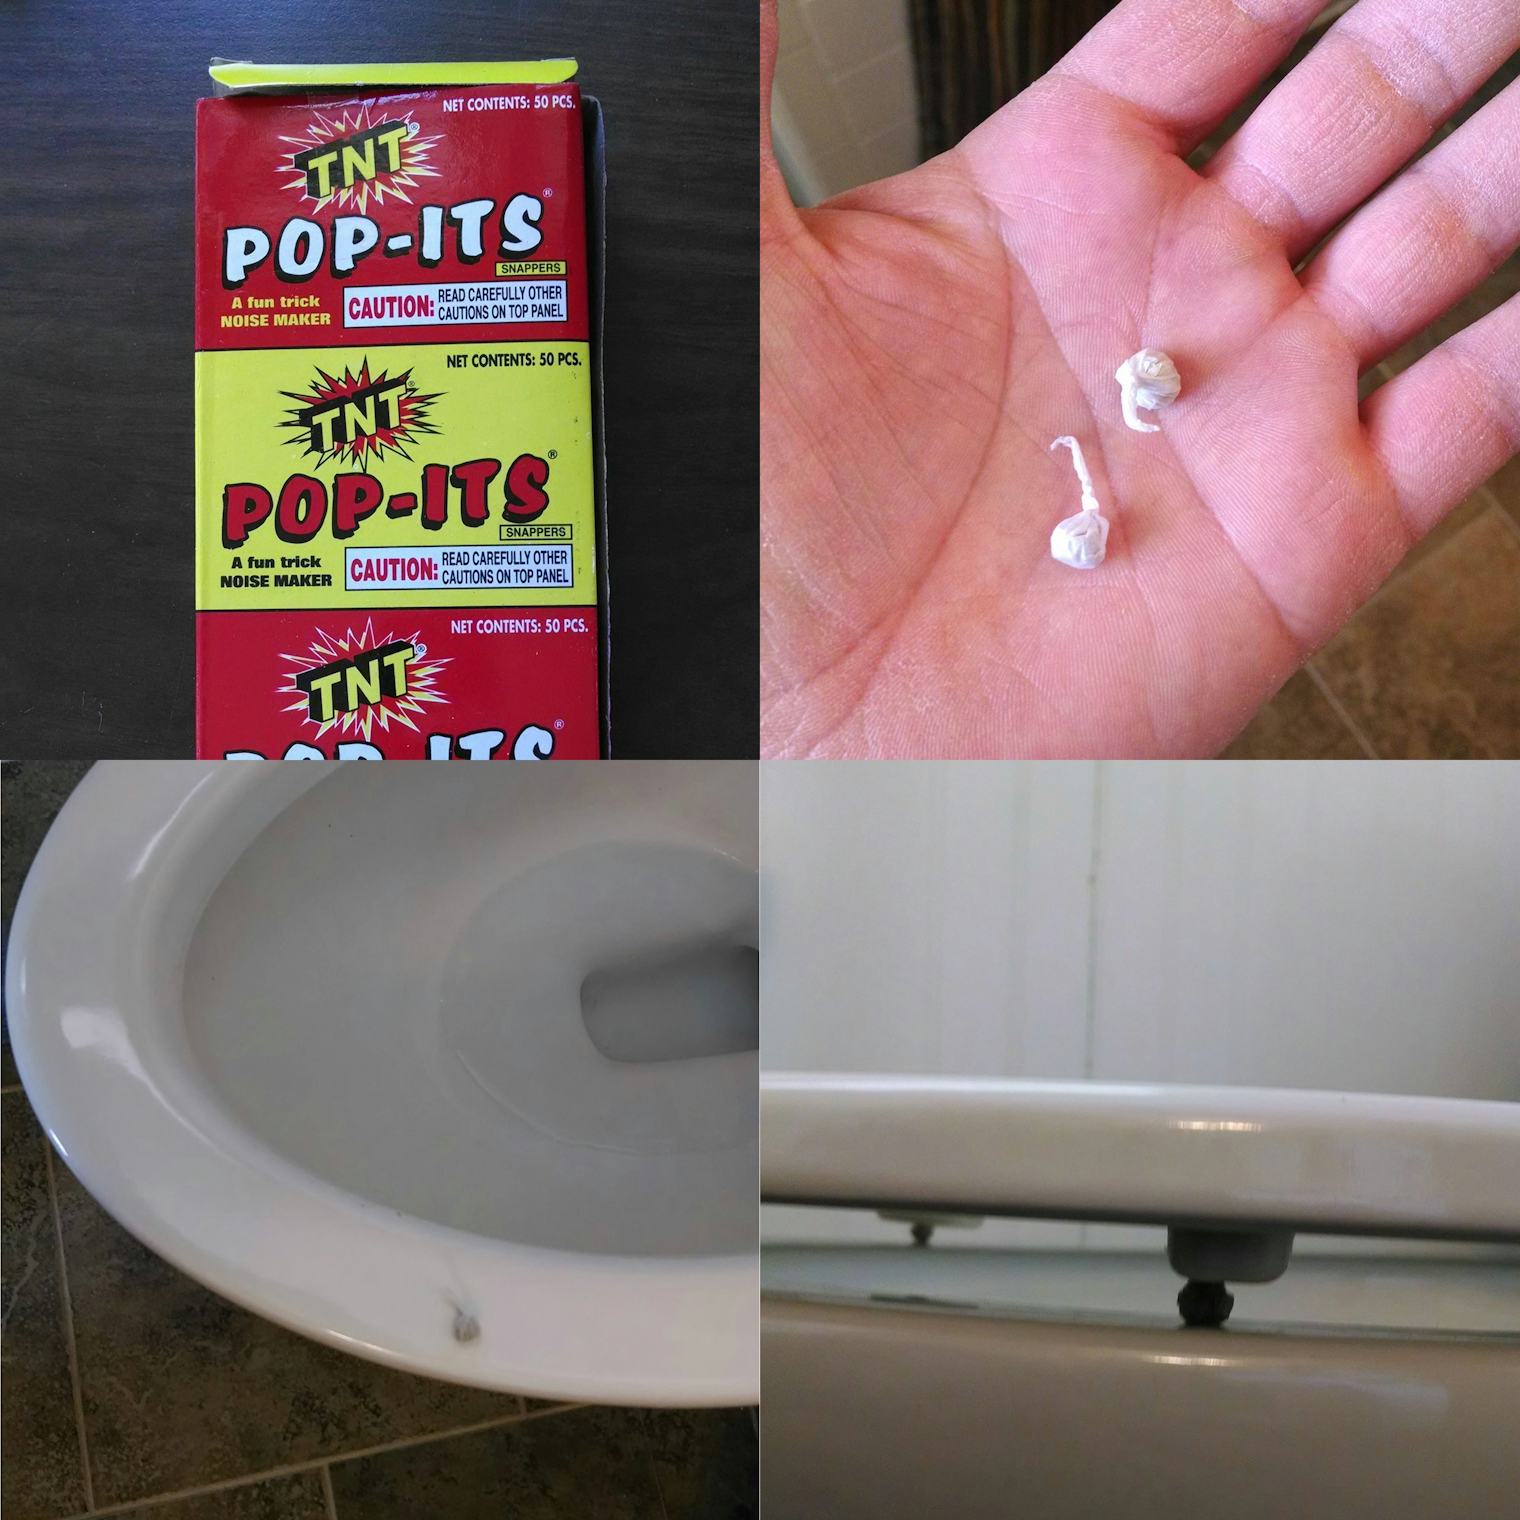 10 Funny April Fools Day Pranks To Play On Your Friends That Are Hilarious But Totally Harmless